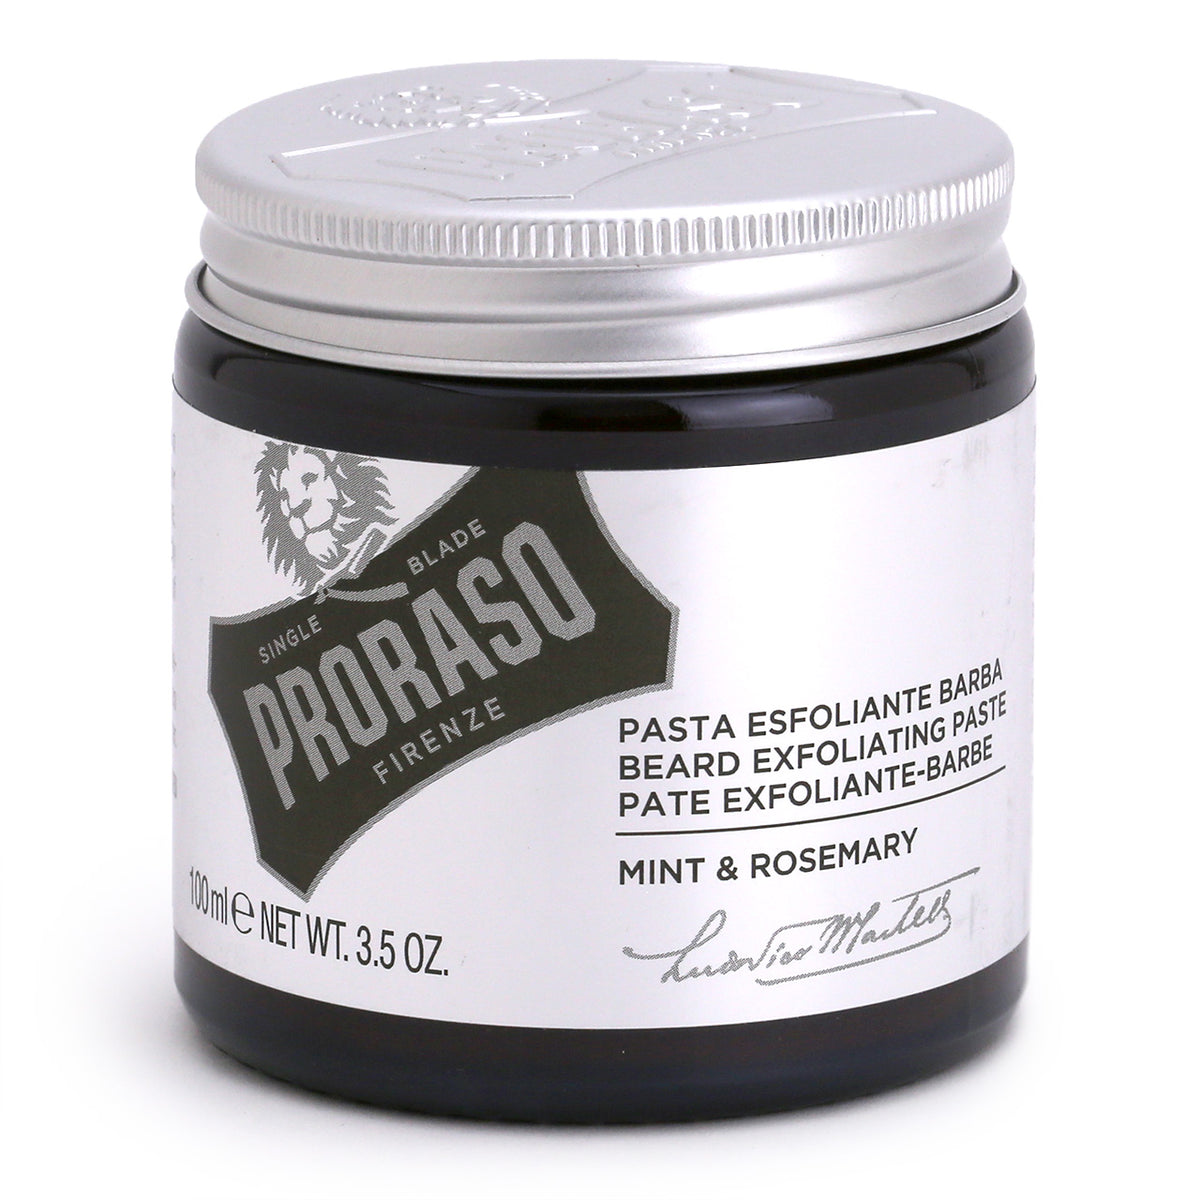 Proraso Beard Exfoliant with Mint and Rosemary in a glass jar with silver label and metal embossed lid.